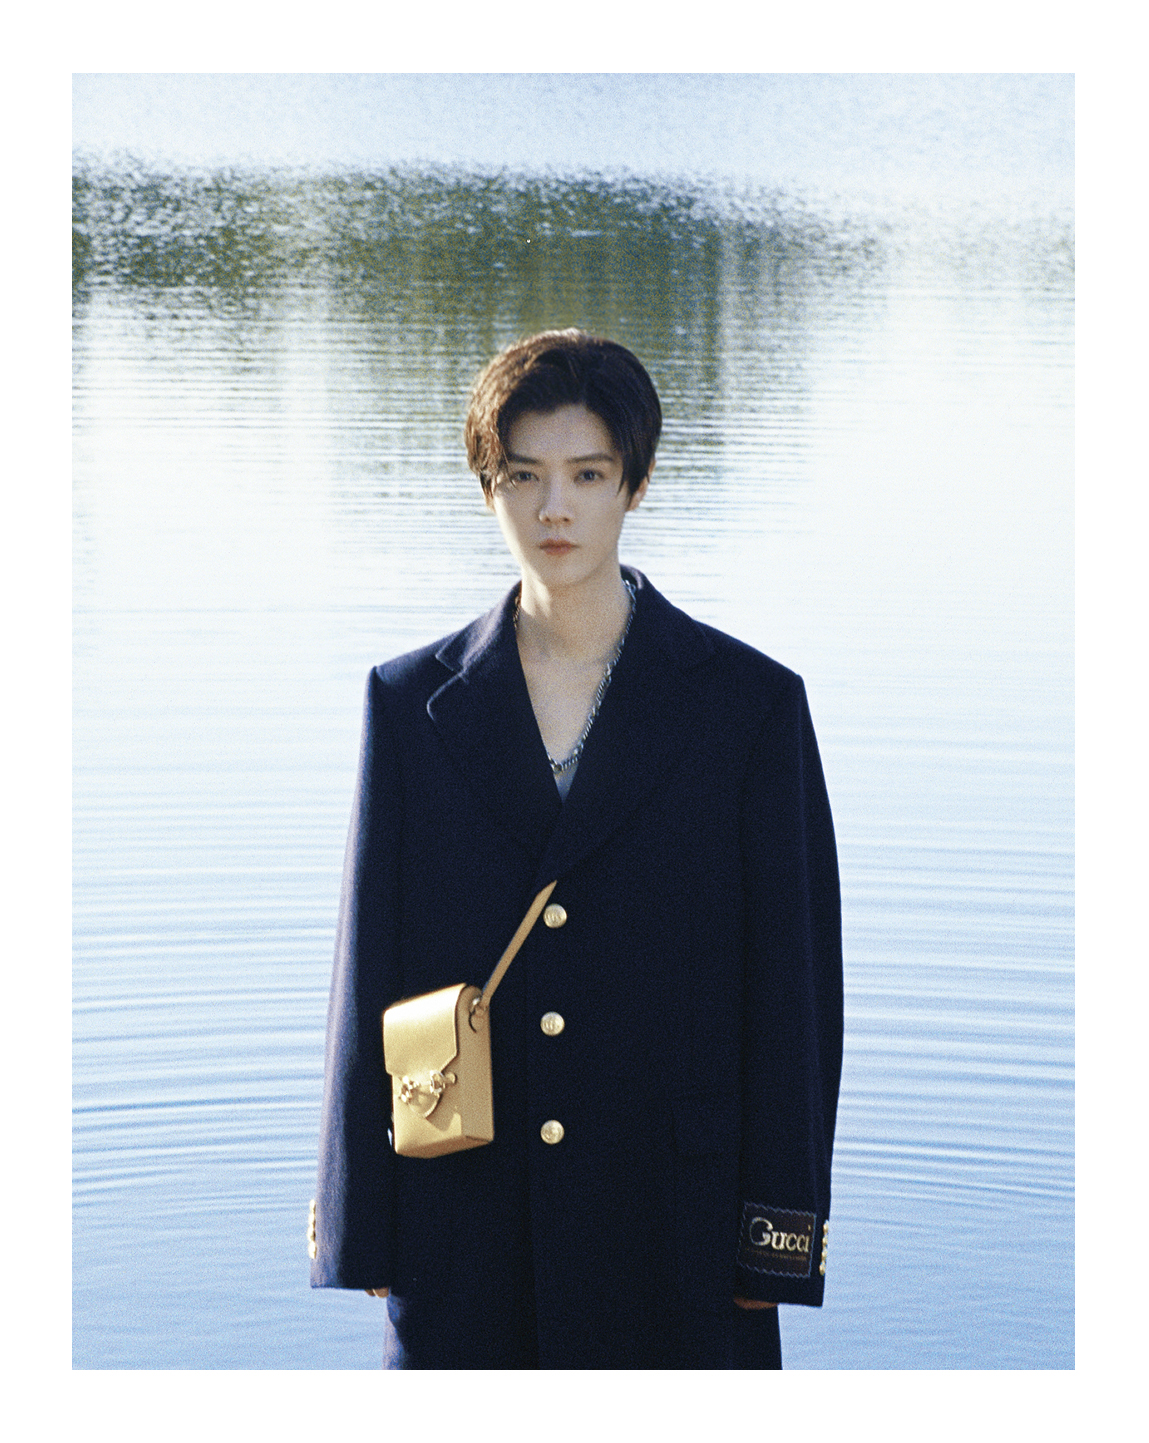 gucci on X: #Gucci's new brand ambassador #LuHan appears in  #LOfficielChina's latest issue wearing a #GucciPreFall20 single-breasted  jacket and a #GucciHorsebit1955 cross-body bag. He is styled by #SylarLu  and shot by #CharlesGuo. #